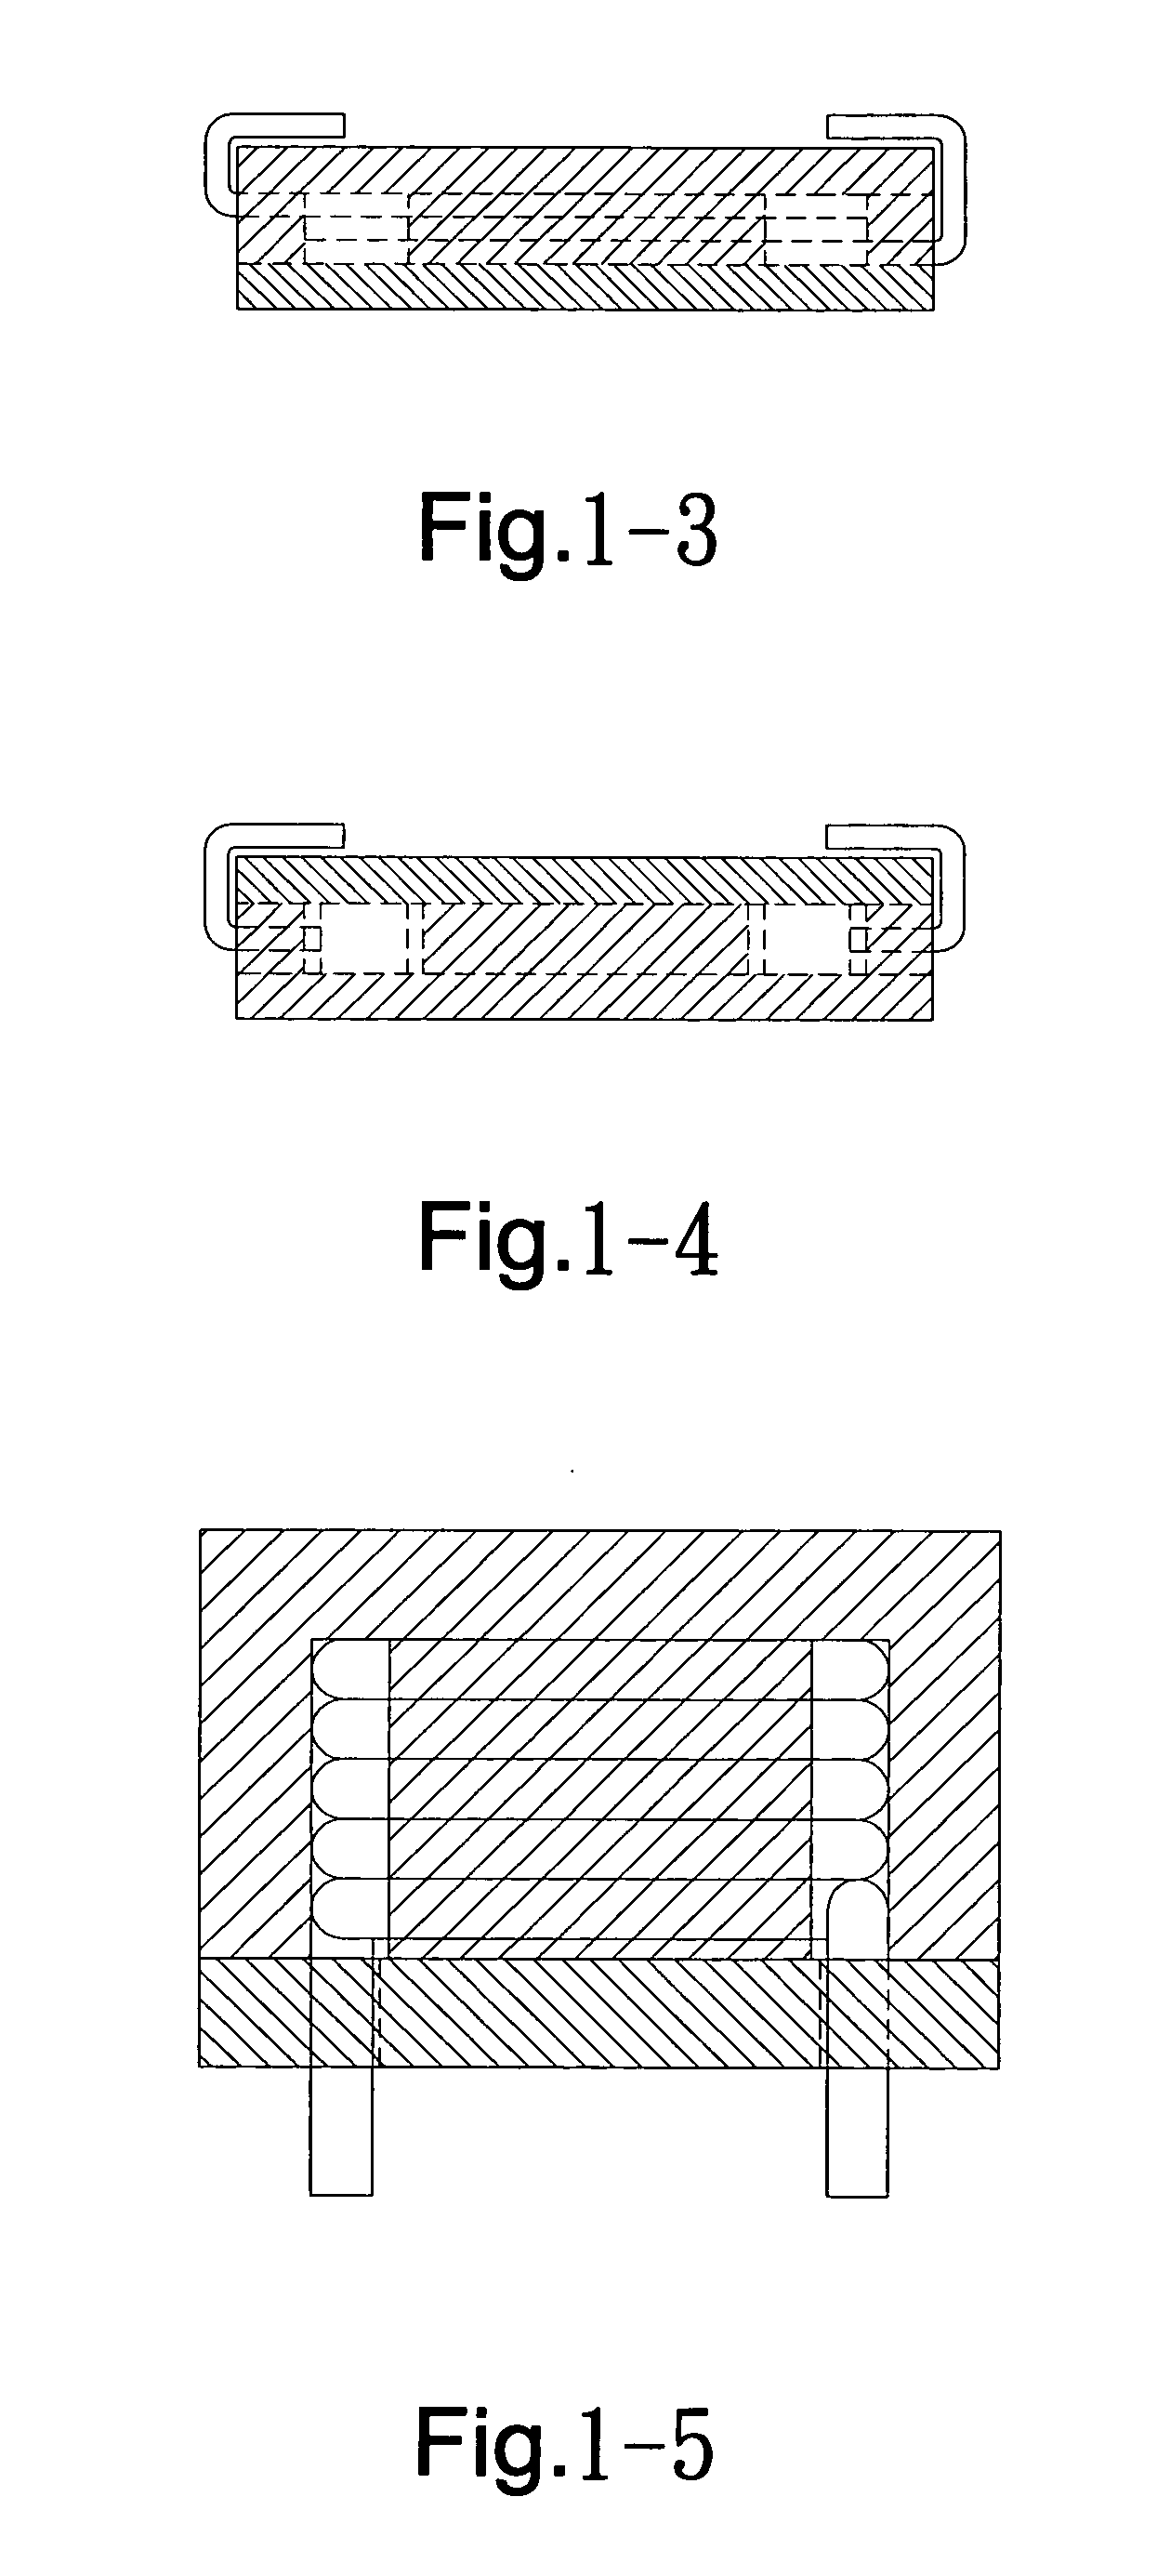 Method of material selection and forming to solve aging of one inductor's iron core